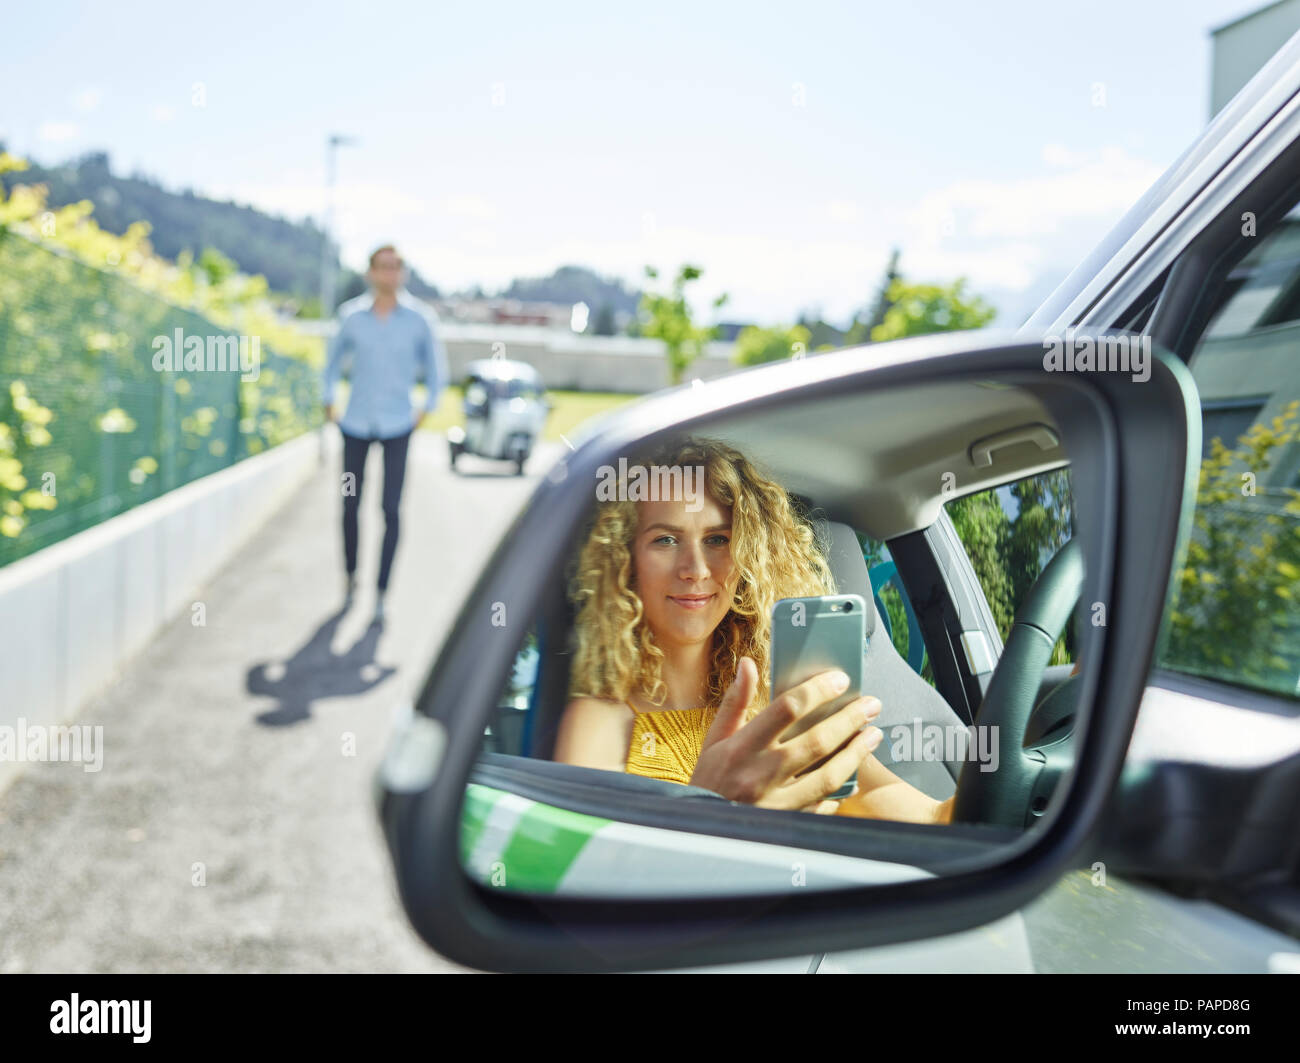 Smiling young woman using cell phone in electric car Stock Photo